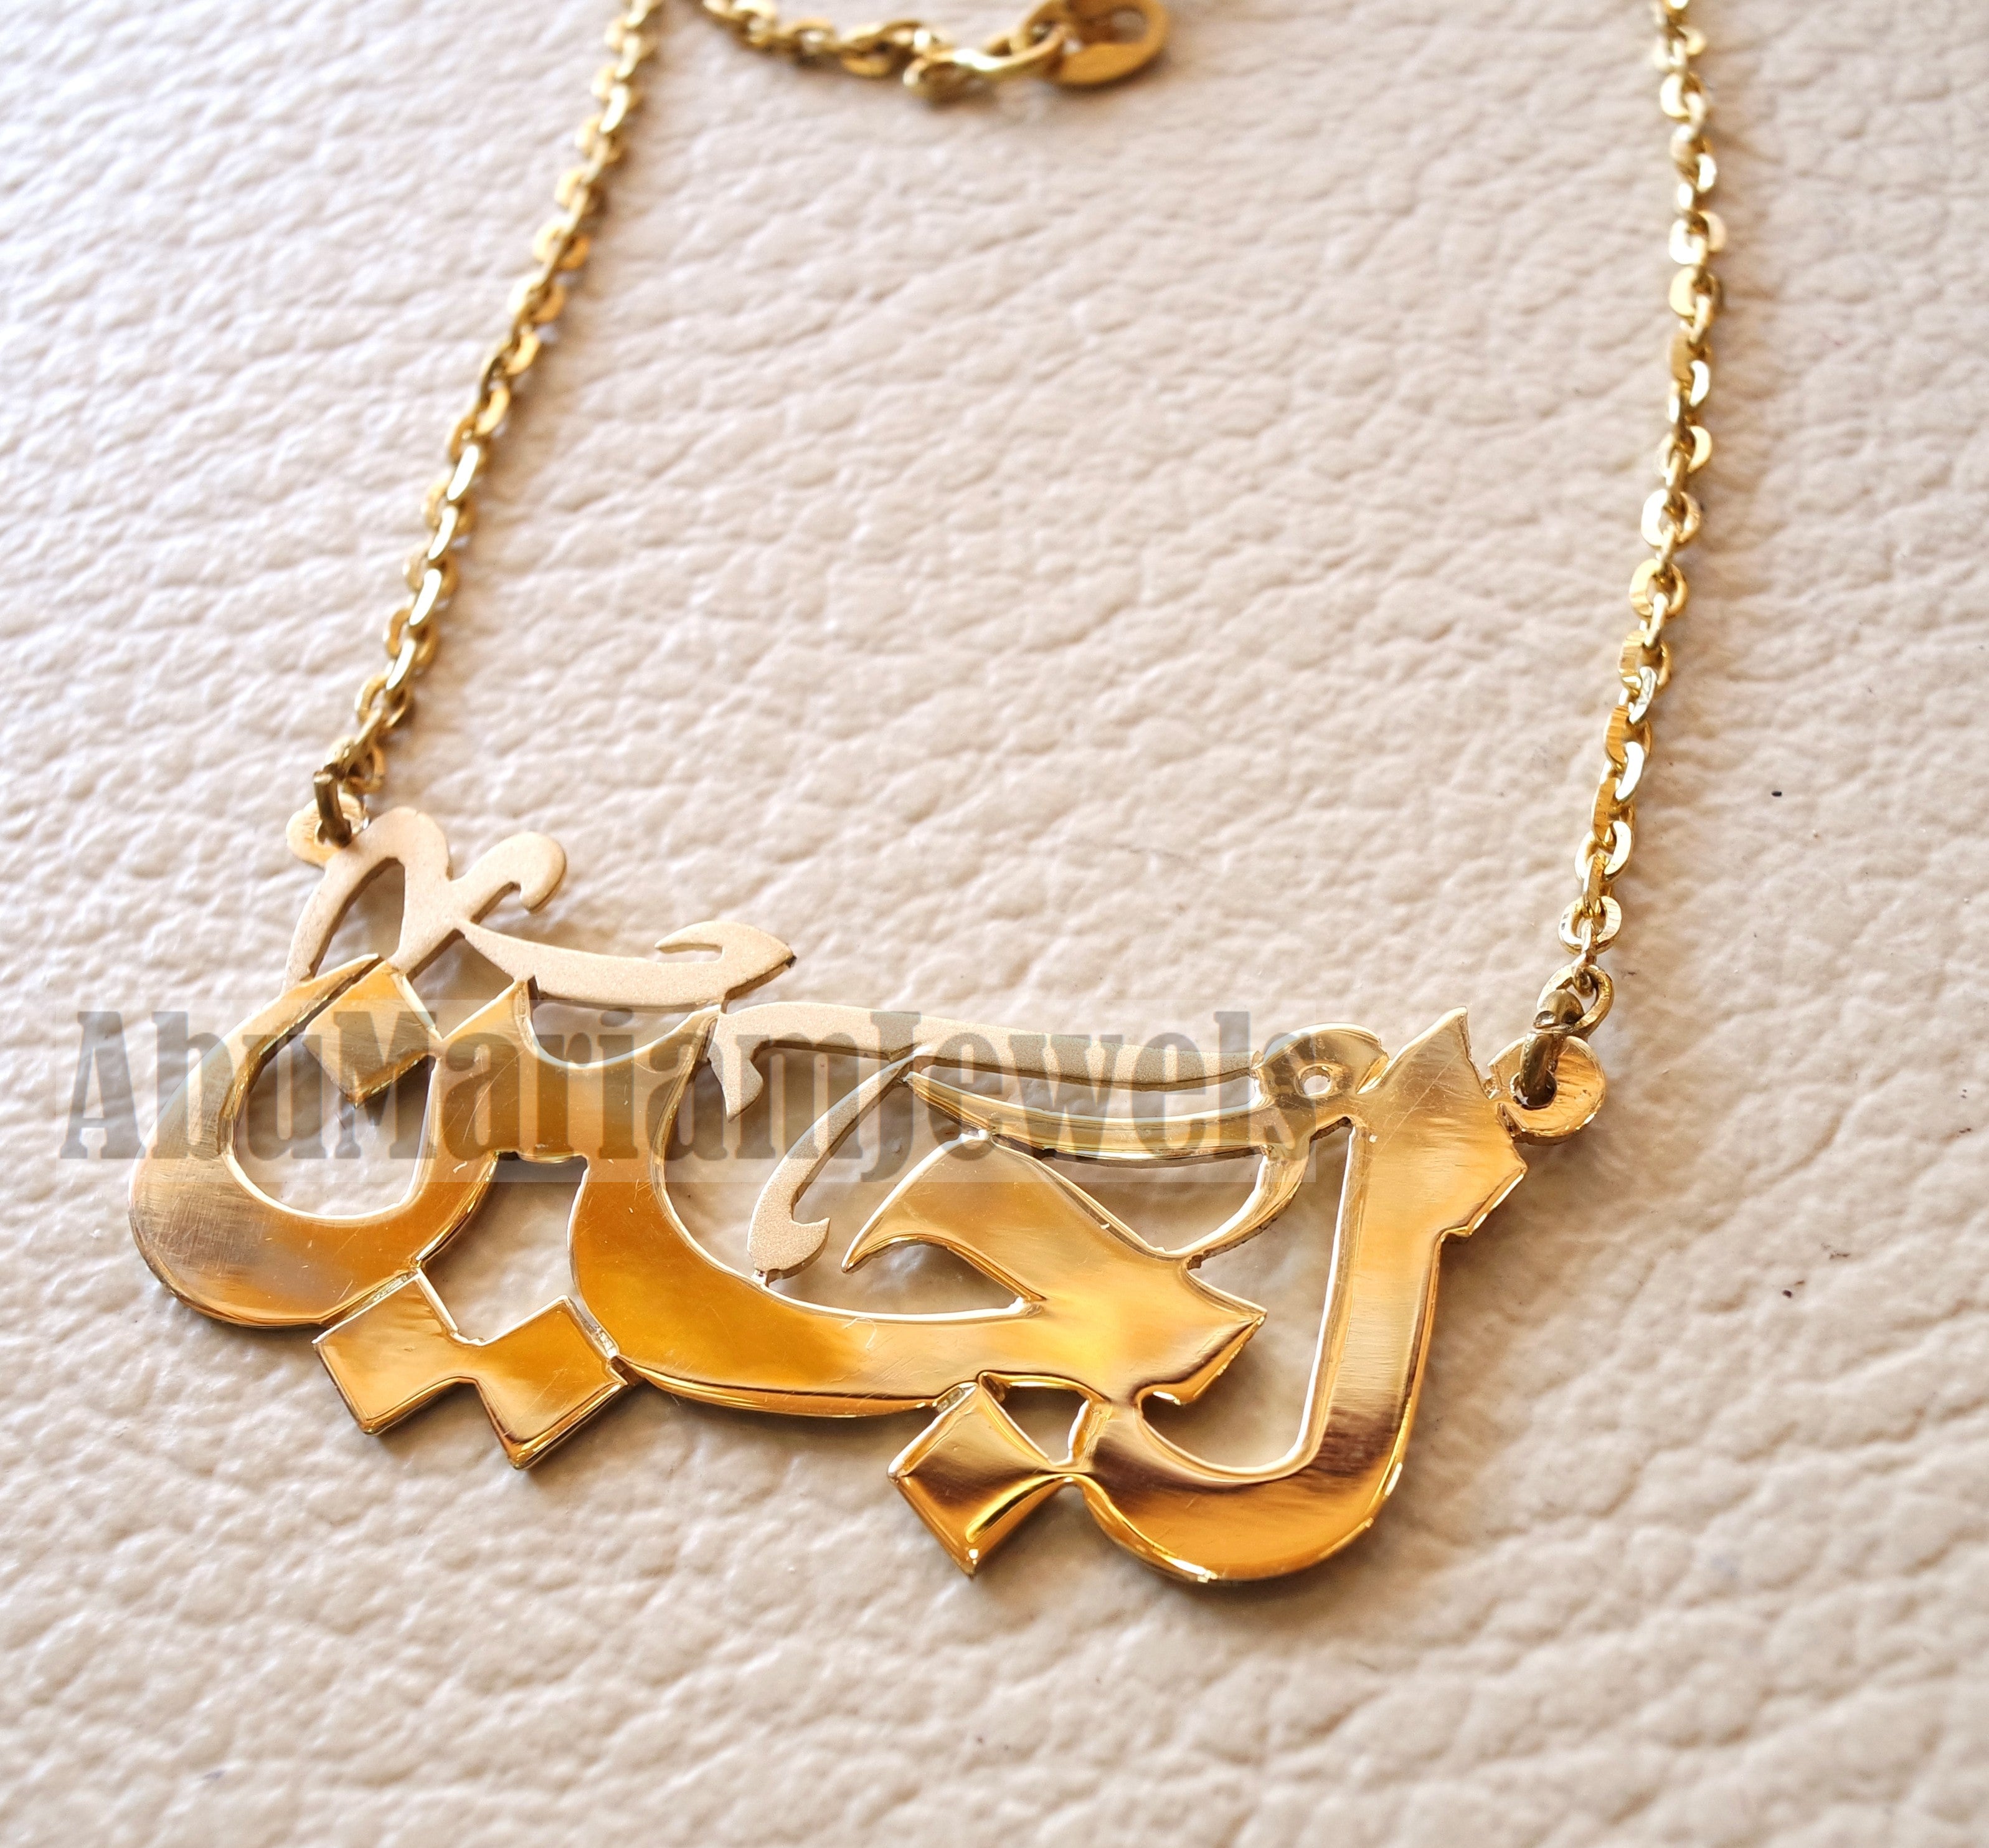 personalized customized 1 name 18 k gold arabic calligraphy pendant with chain standard , pear , rectangular or any shape fine jewelry N1009